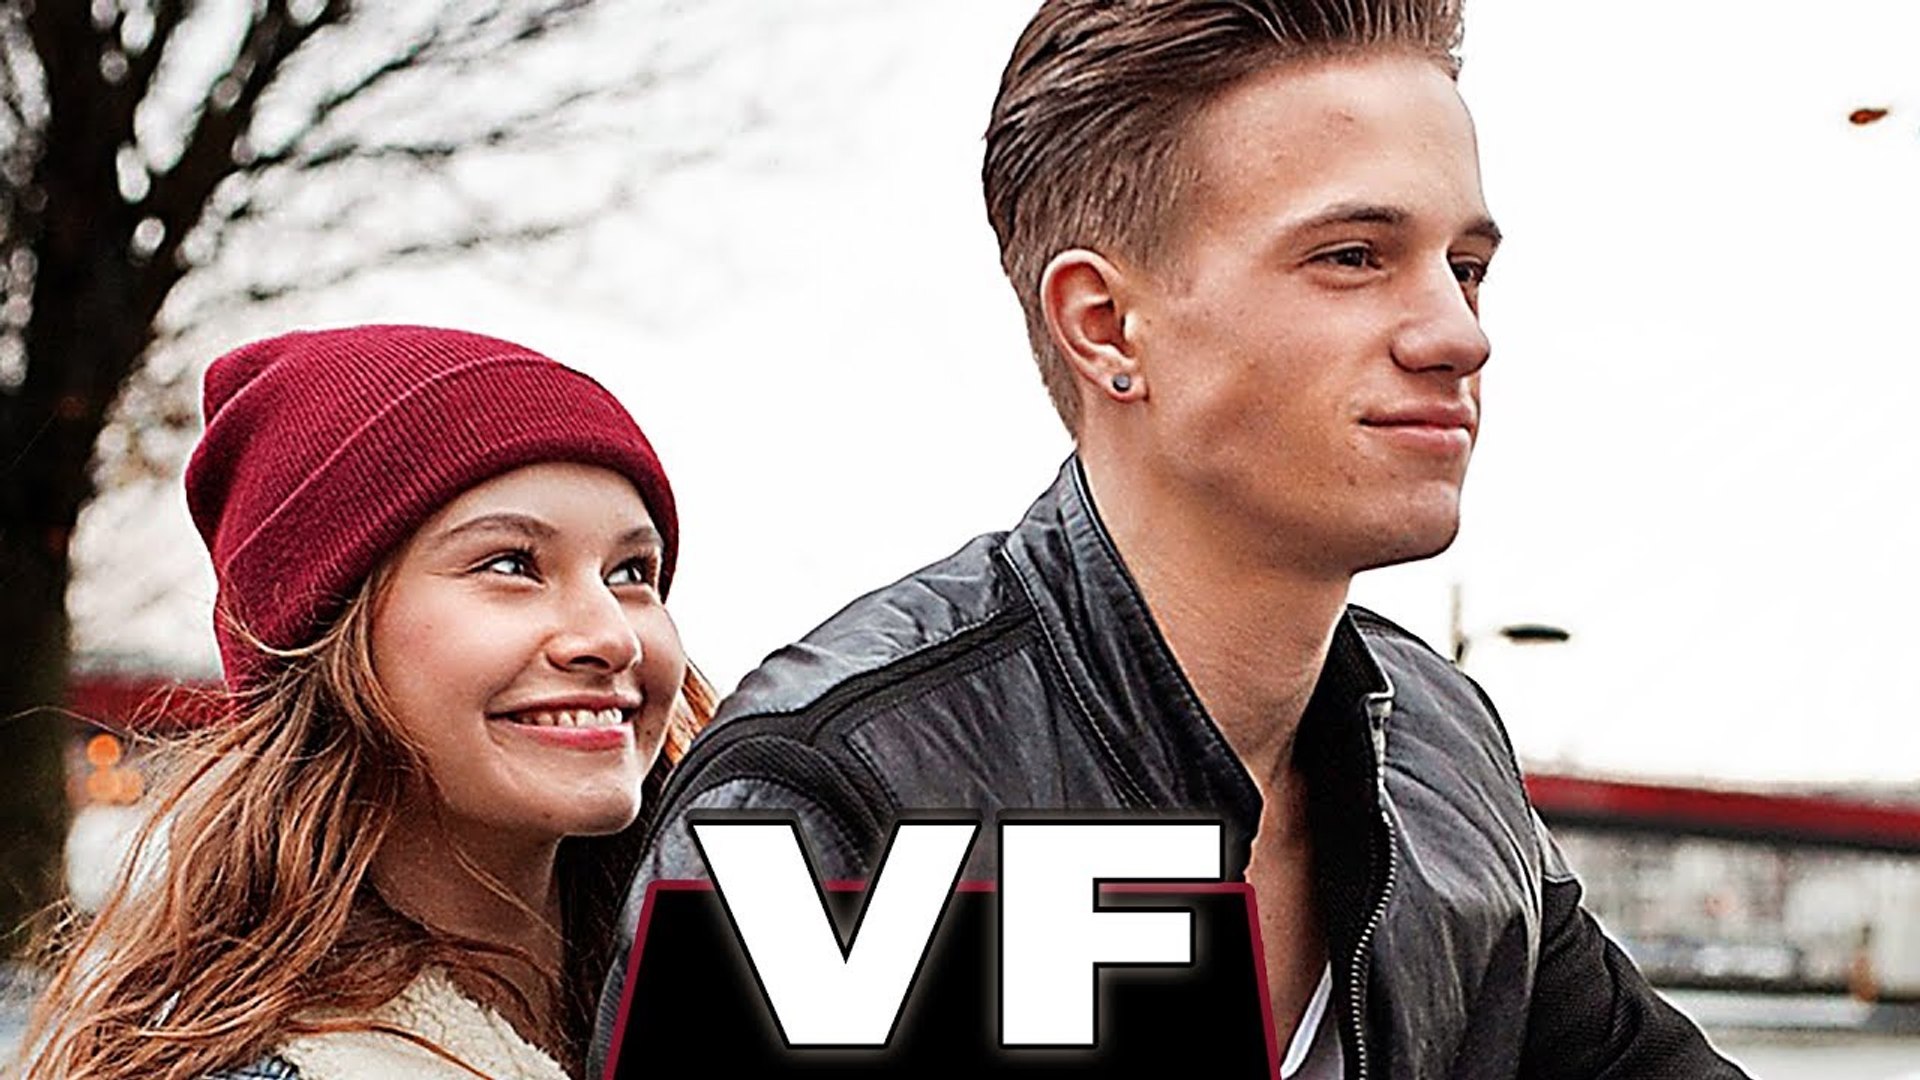 HEART BEAT Bande Annonce VF - Vidéo Dailymotion